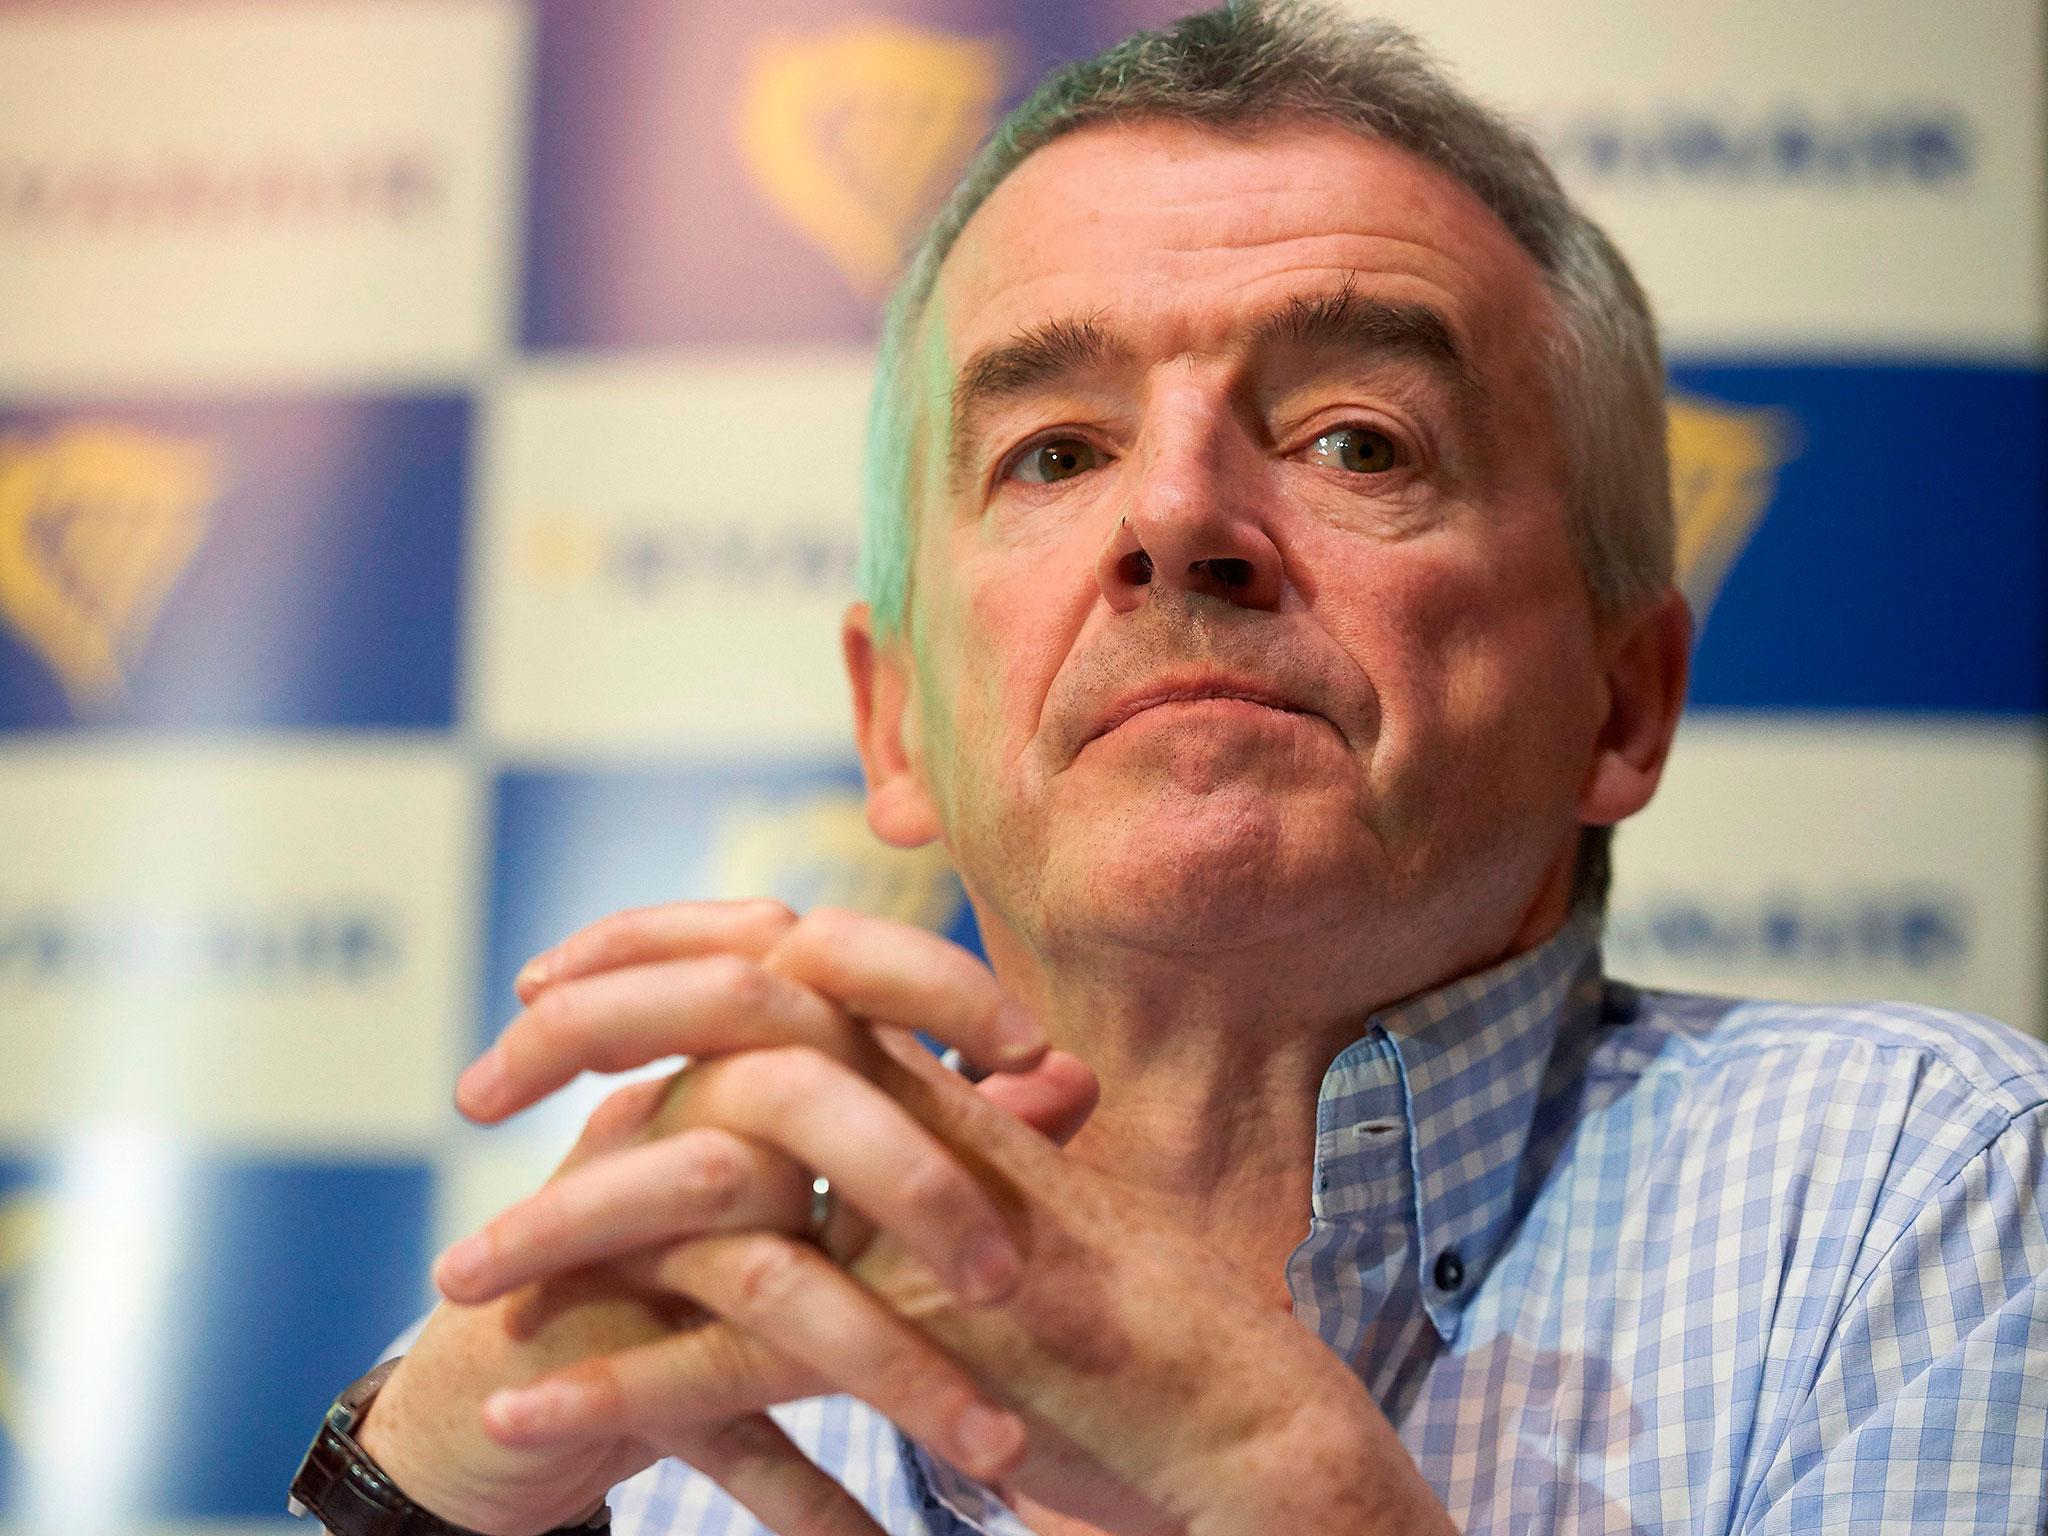 Michael O'Leary has been vocal in his criticism of the quarantine policy